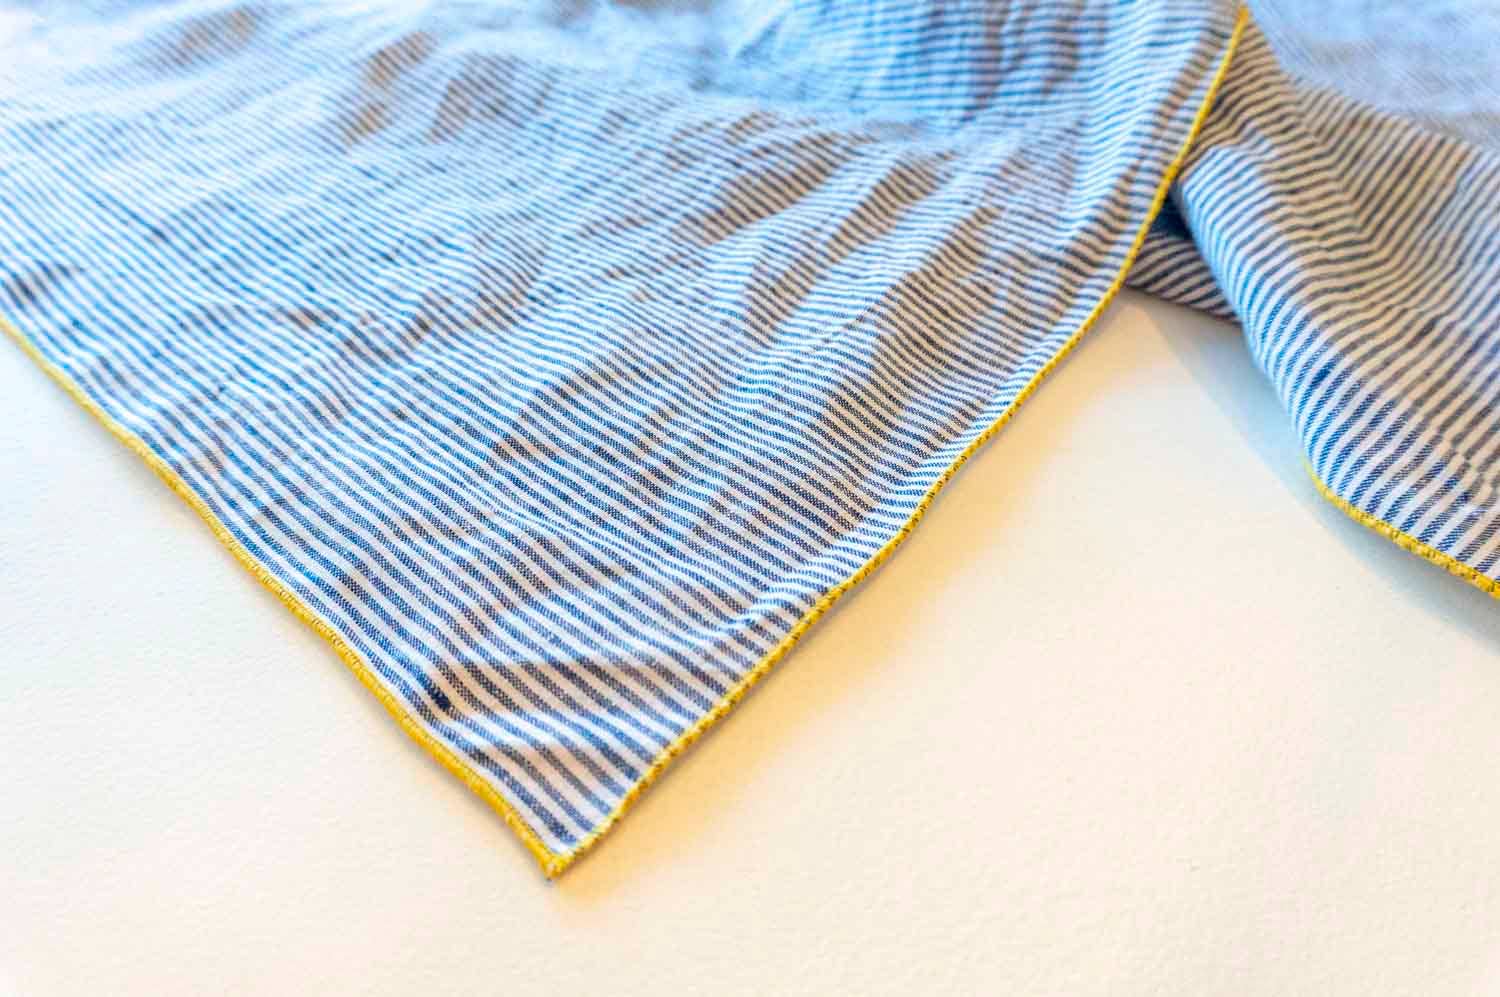 100% Linen - Blue French Pinstripe Tablecloth